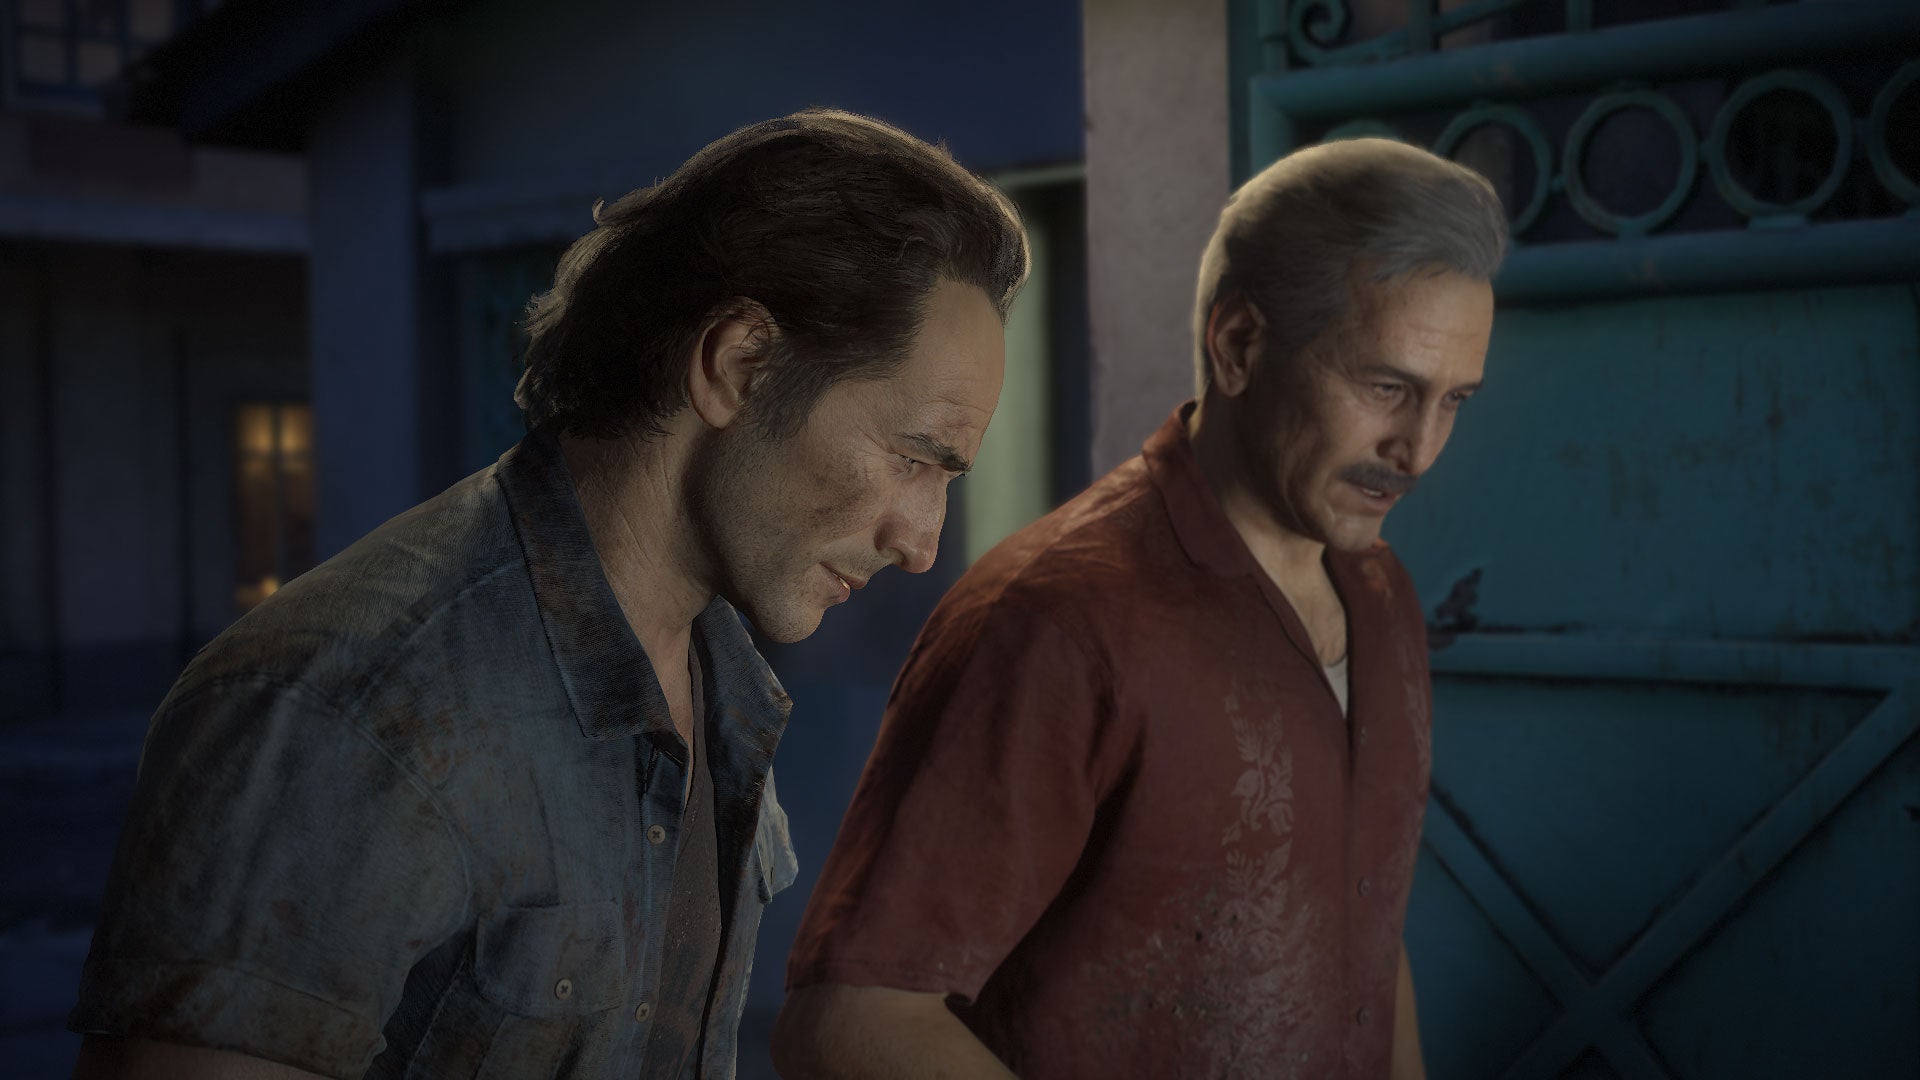 Image for Uncharted 4 single-player DLC will focus on Sam Drake, full reveal at PlayStation Experience - rumour